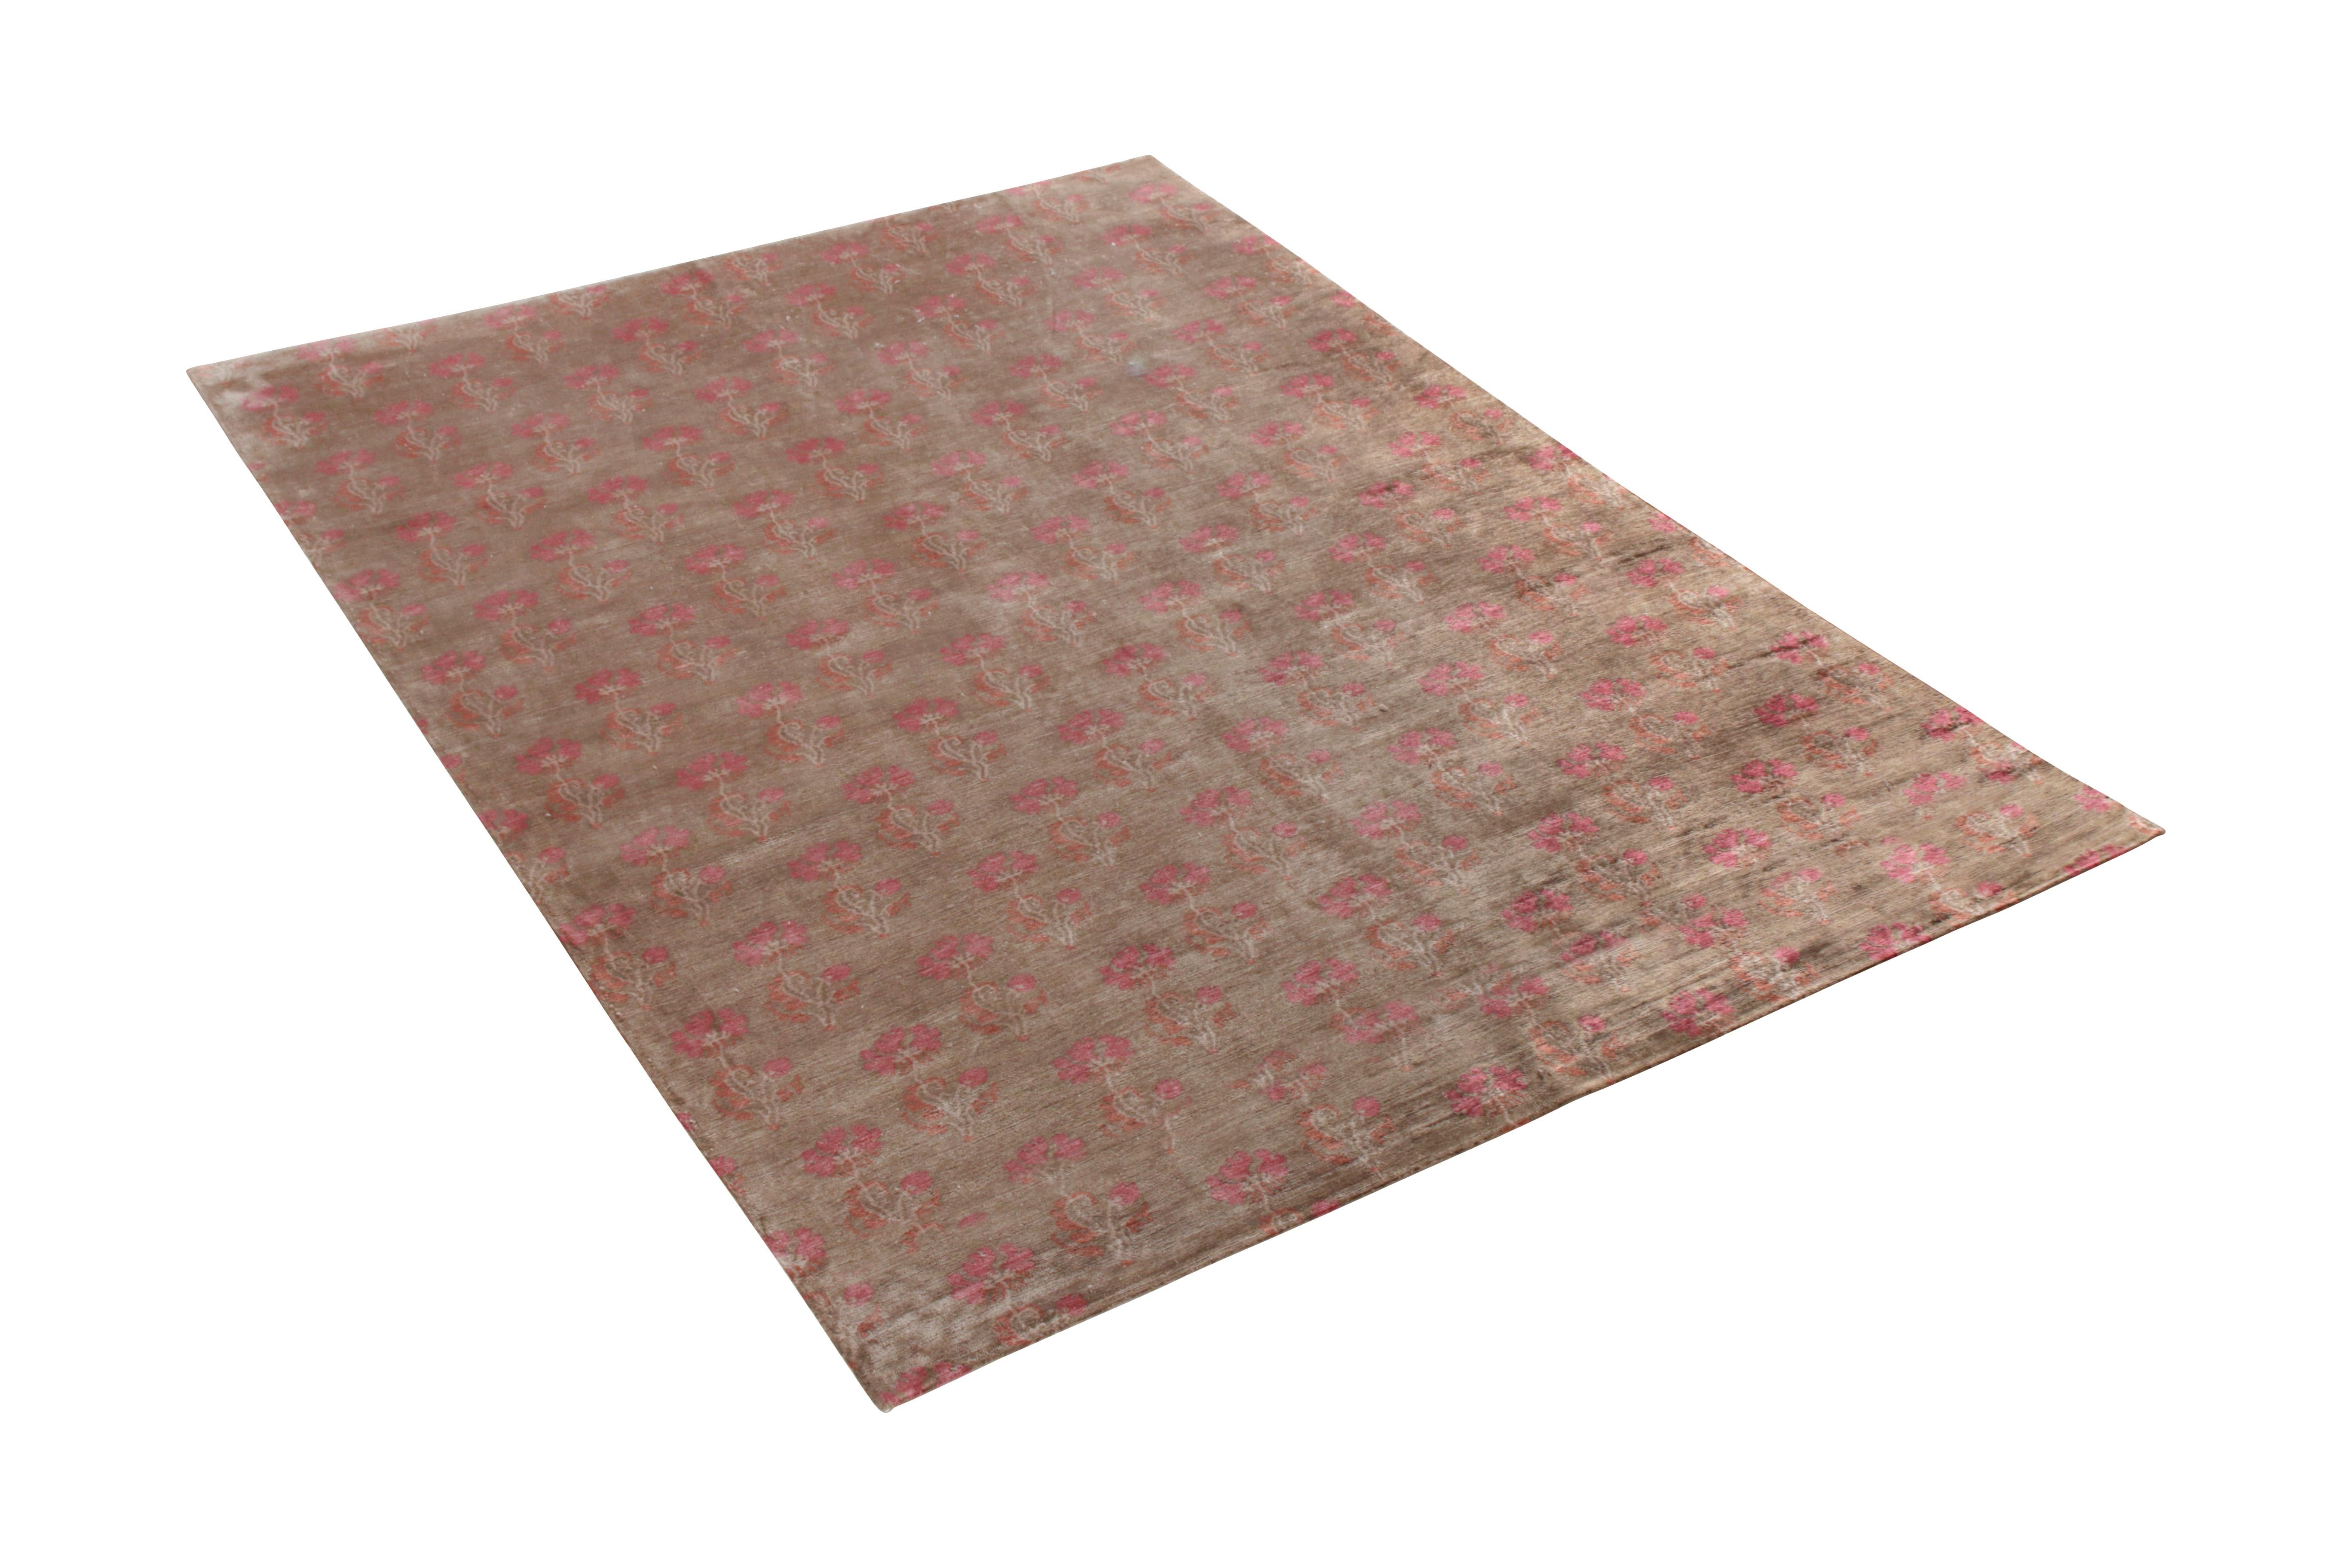 A handmade piece in hand knotted silk, this 7 x 9 rug by Rug & Kilim embraces a transitional floral style with a modern attitude and movement, enjoying the play of whimsical pink on rich brown all complemented by the natural luster of the silk in